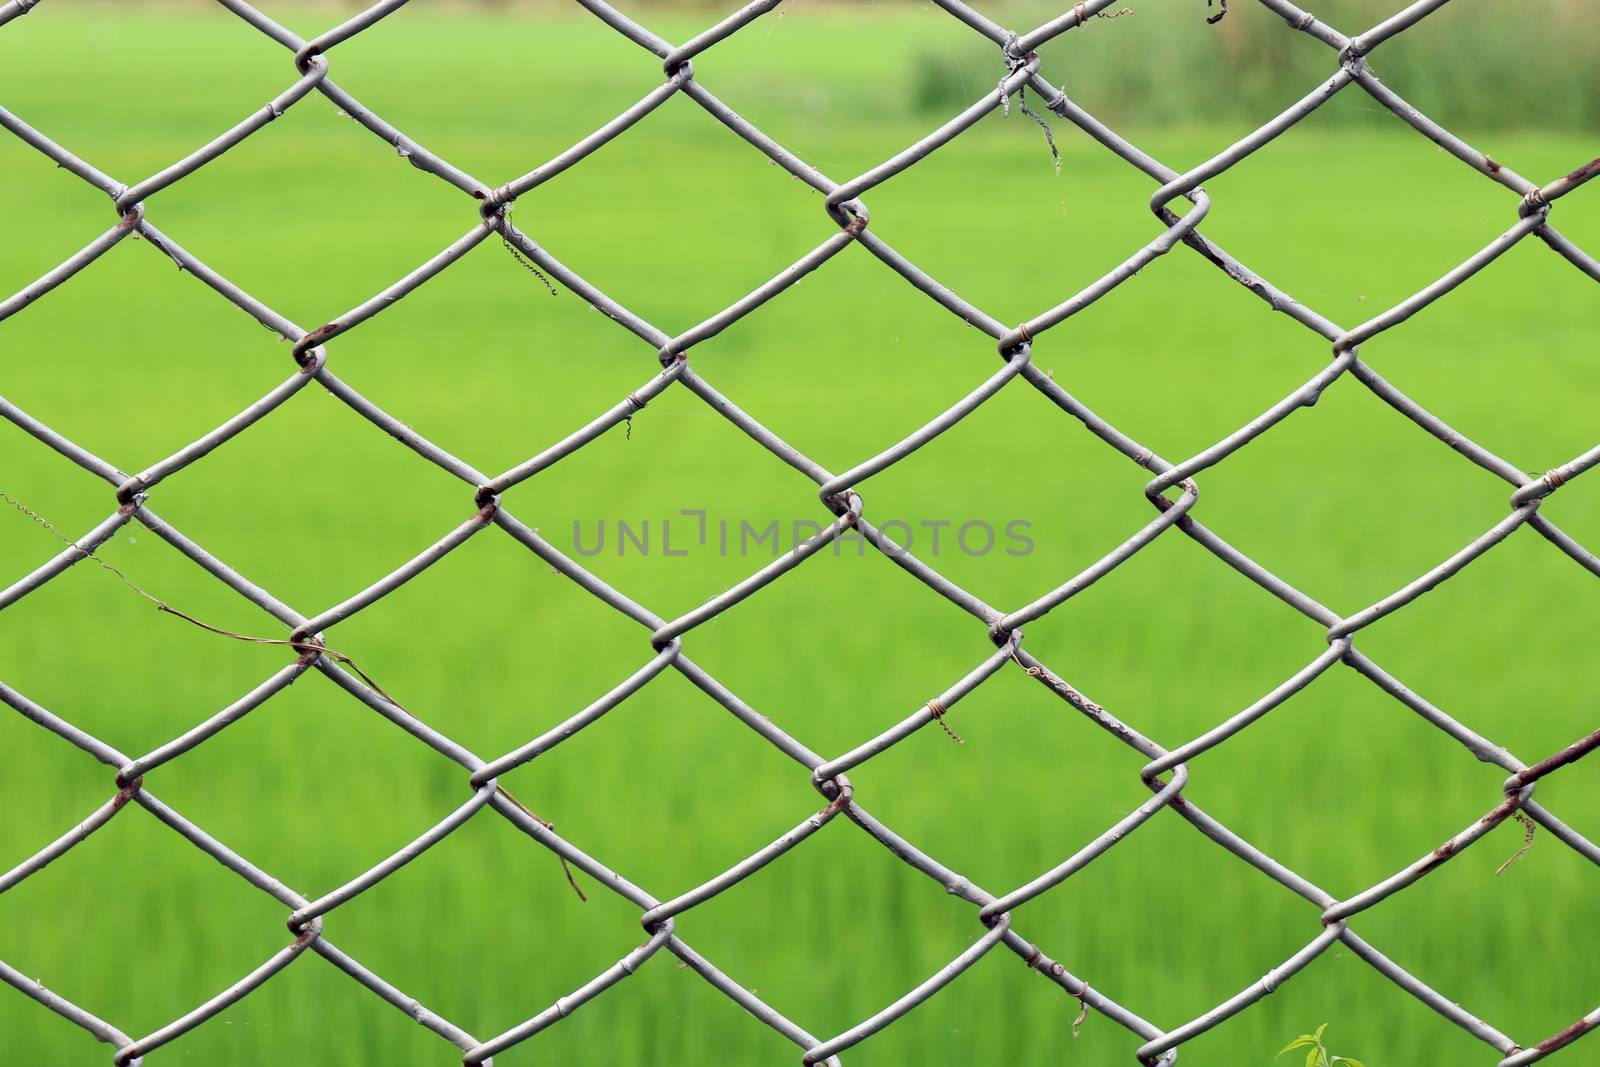 Metal netting, Mesh fence iron Rusty barbed wire detention center security, Chain link fence close up on green nature background, Metal netting for background by cgdeaw